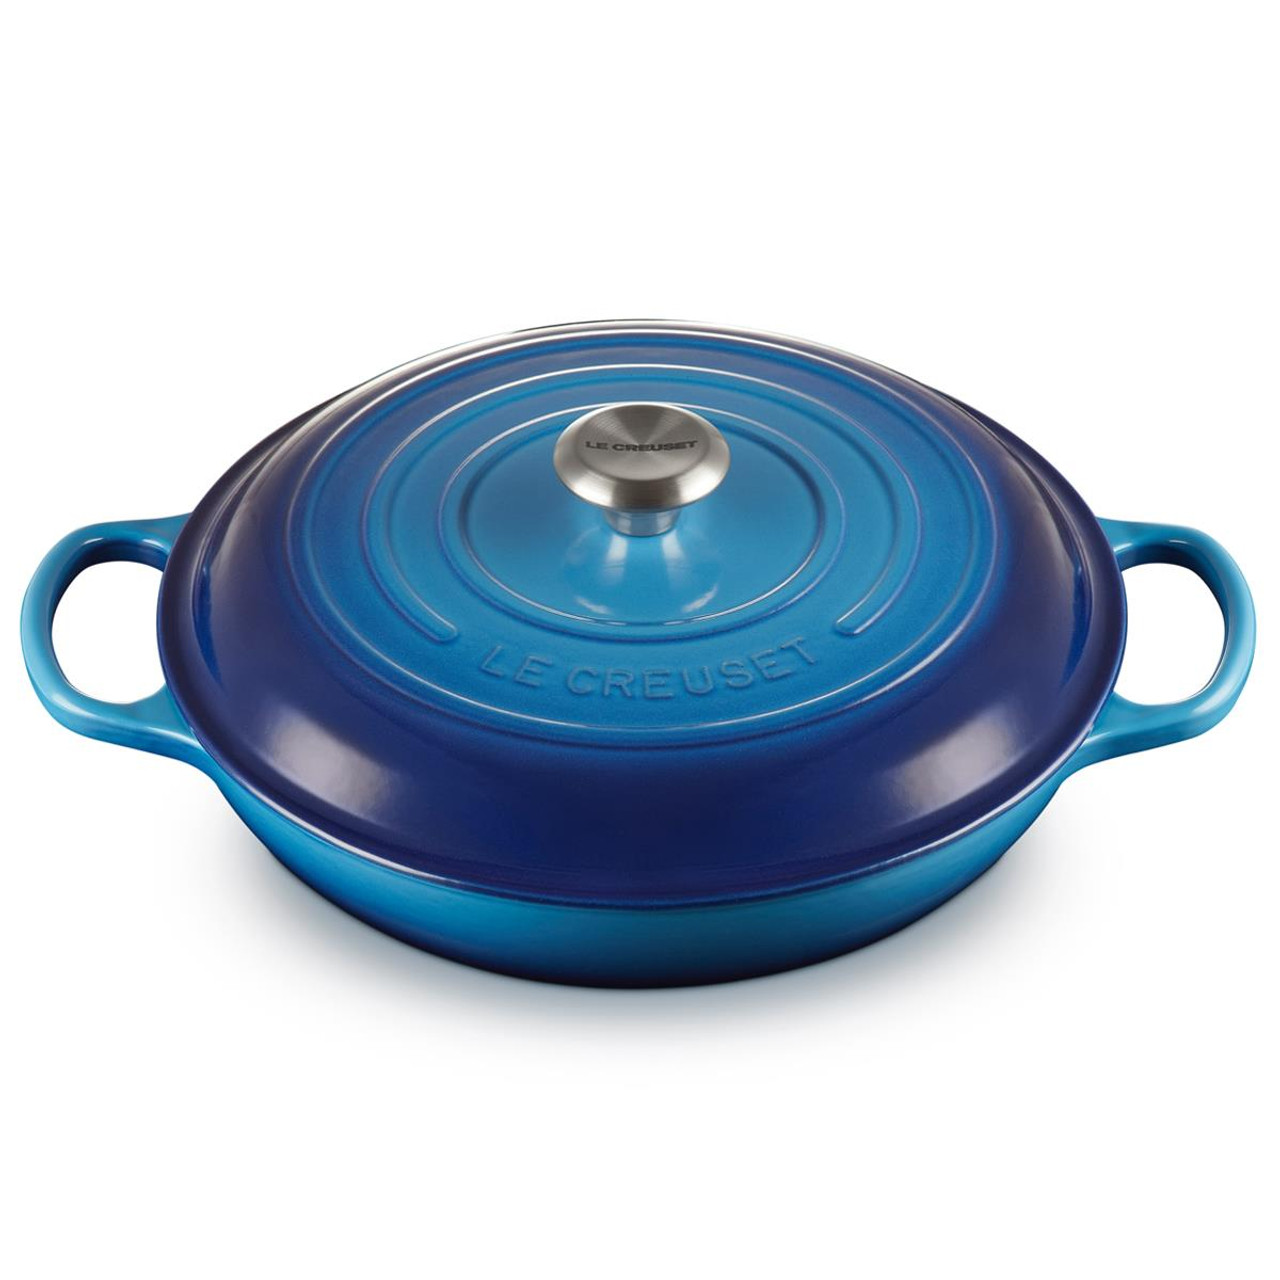 Which hobs can the Le Creuset shallow casserole dish be used on?